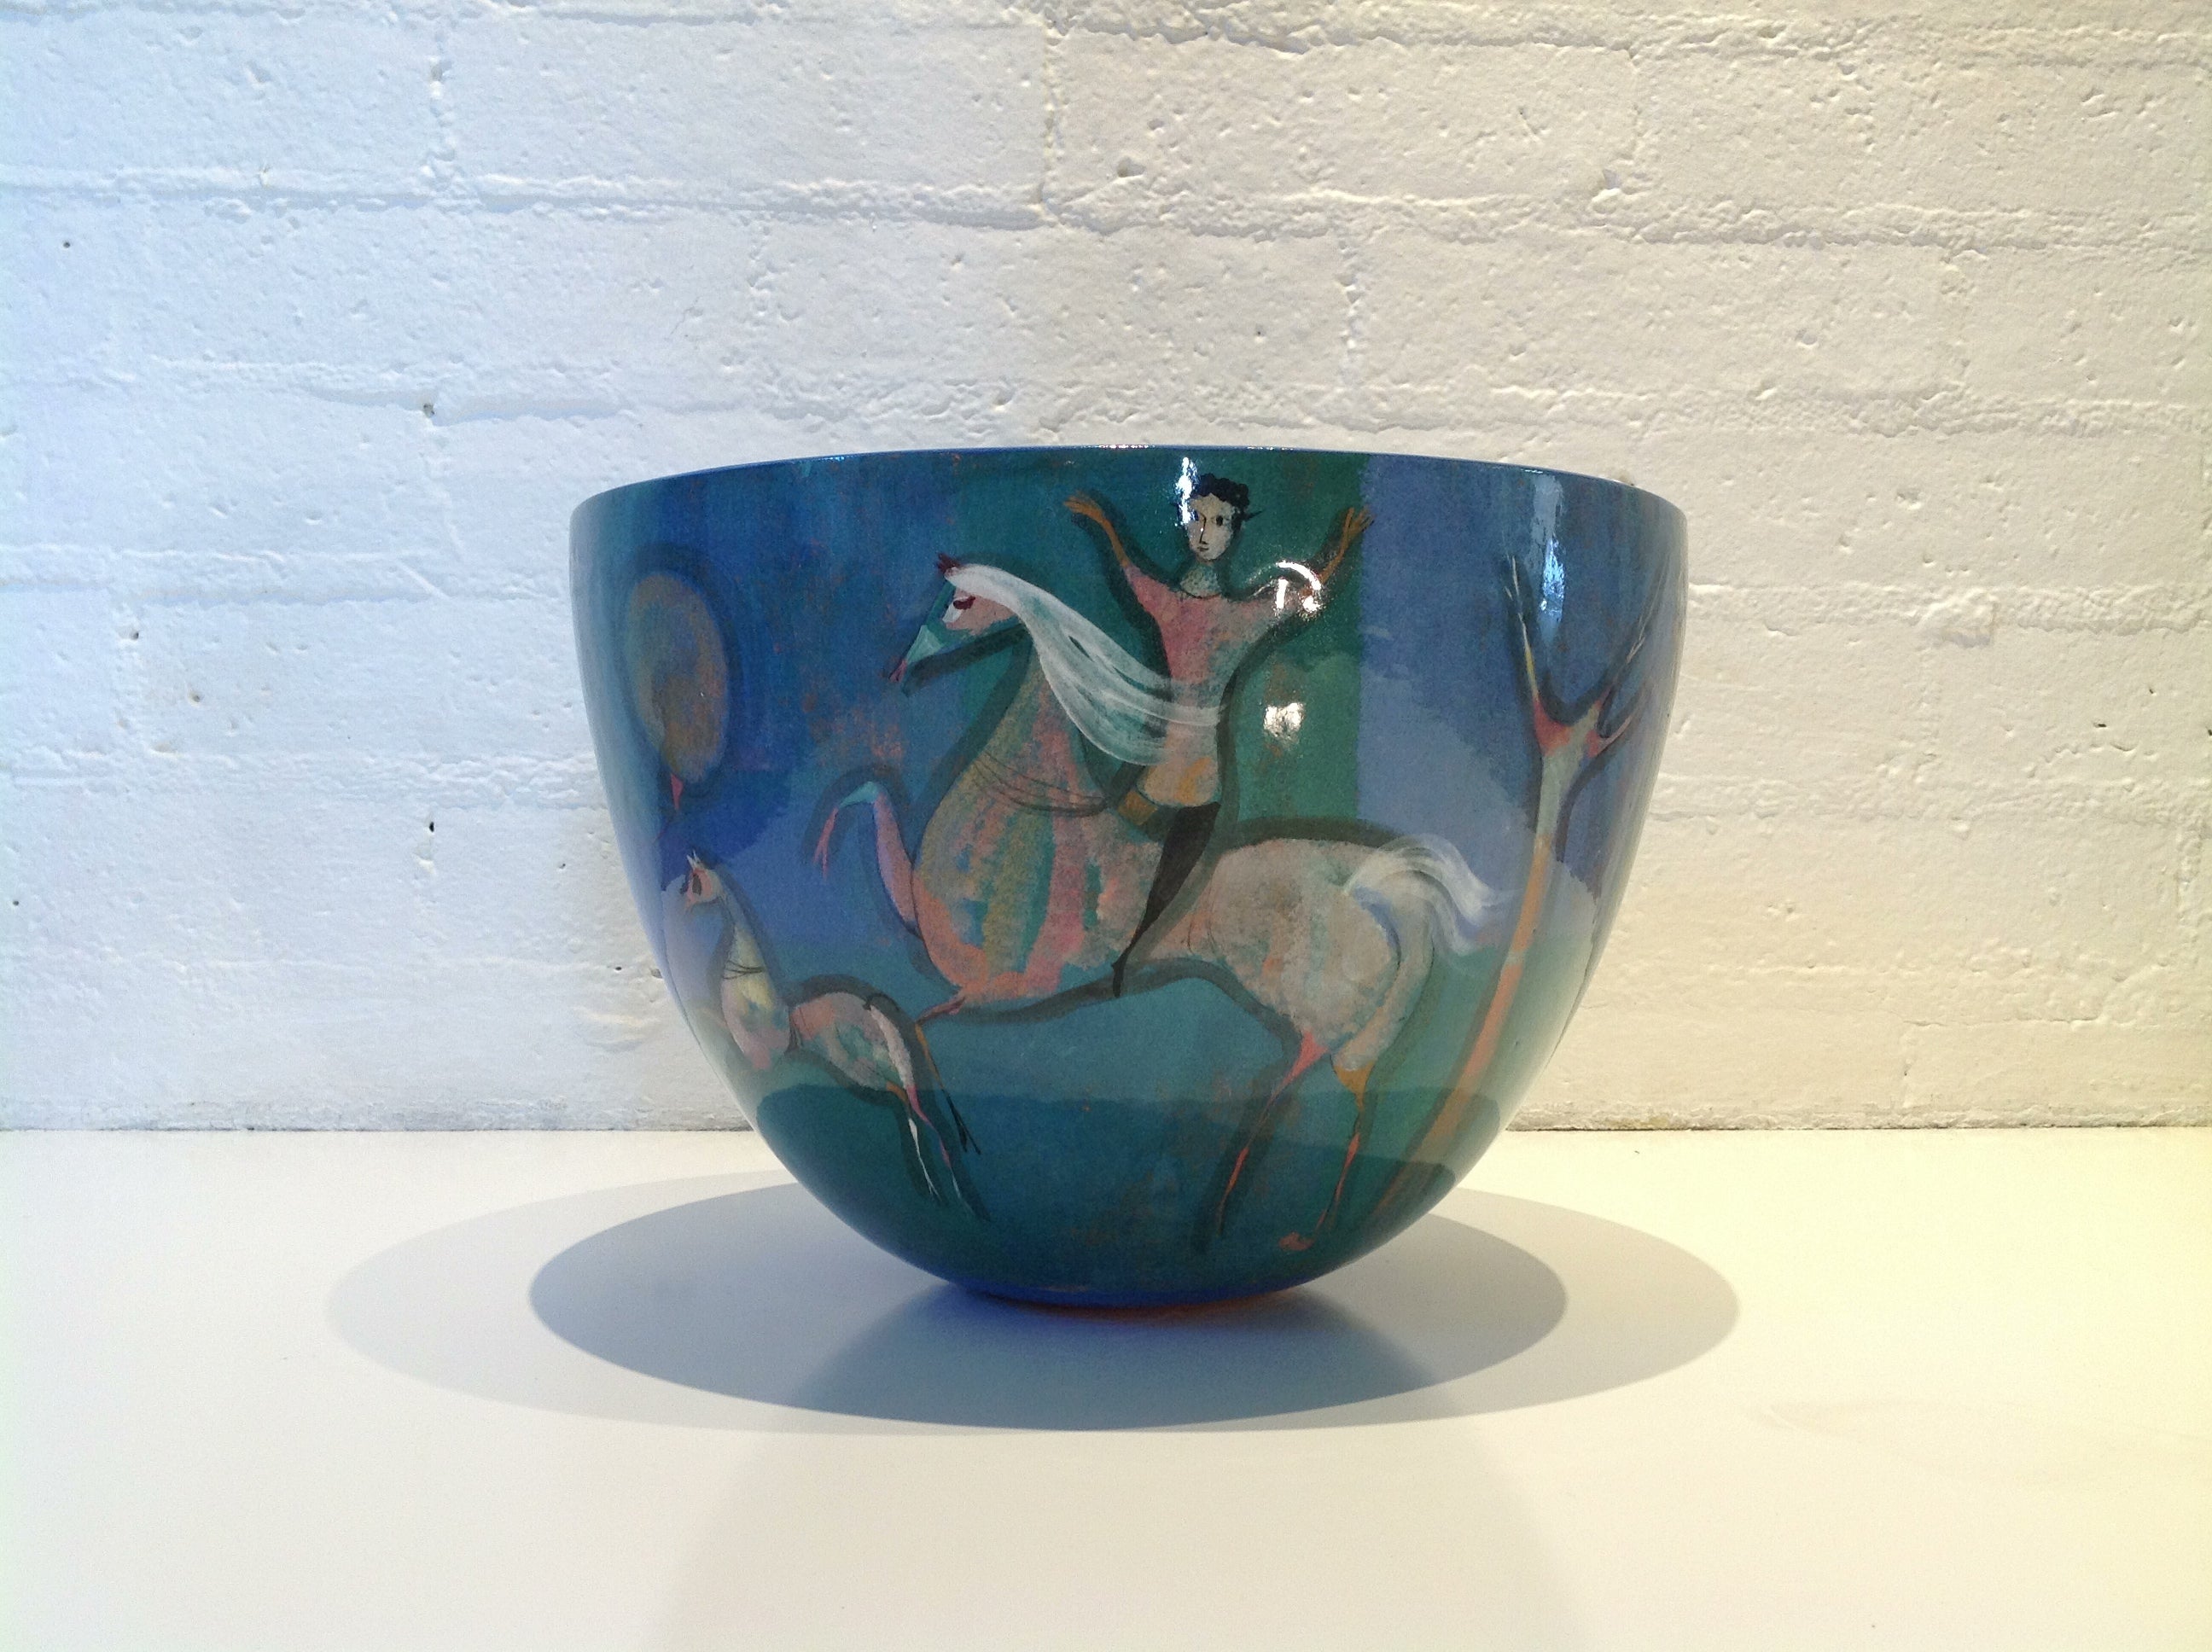 A Monumental Glazed and Painted Ceramic Bowl by Polia Pillin